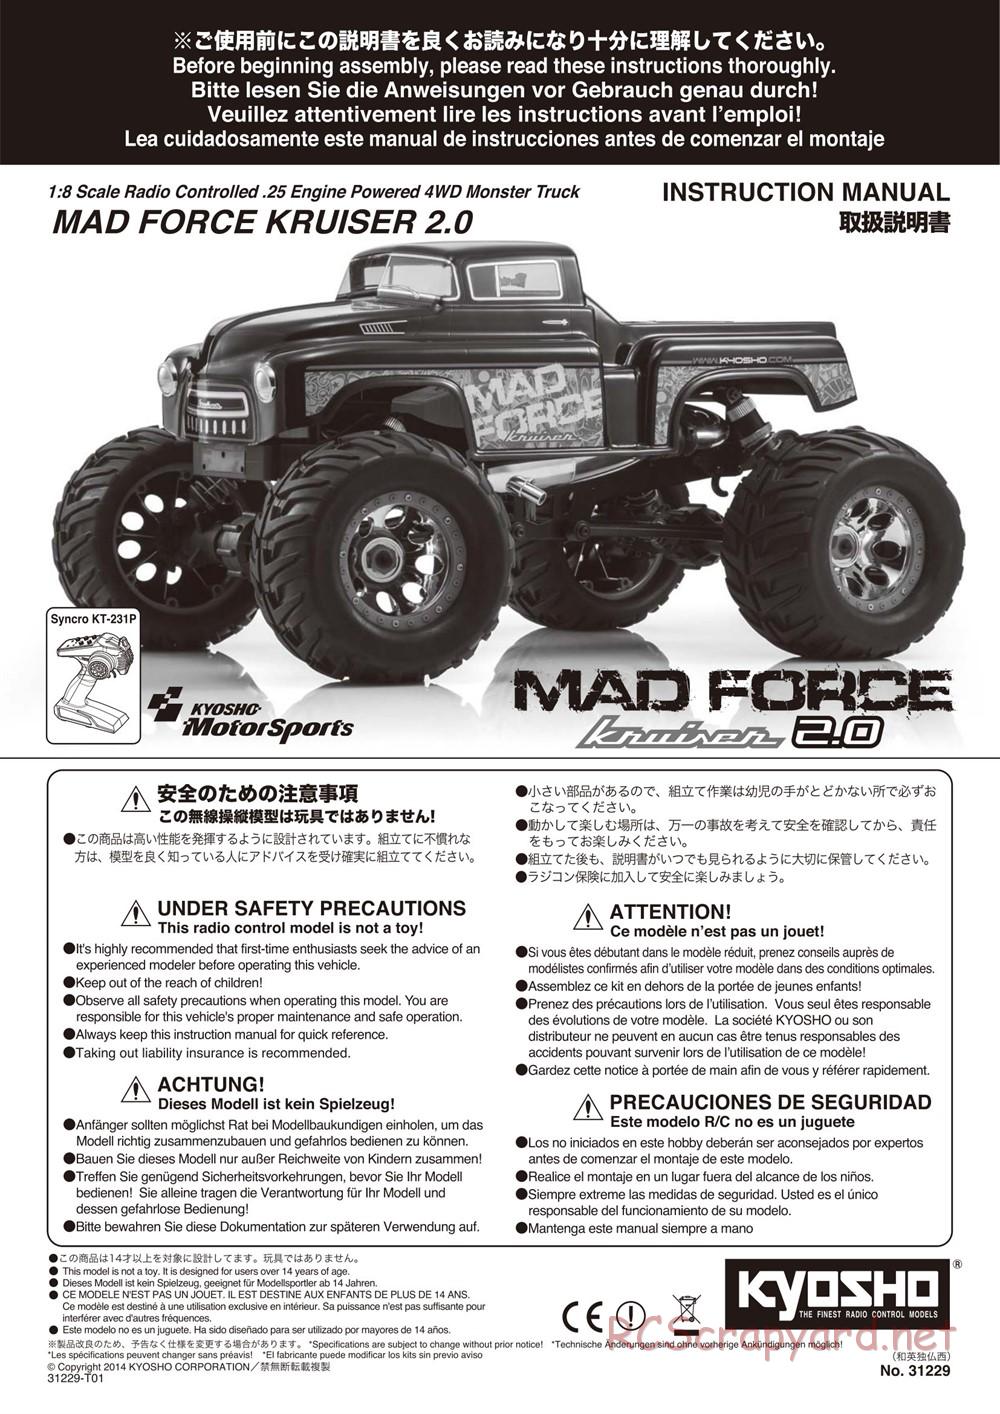 Kyosho - Mad Force Kruiser 2.0 - Manual - Page 1